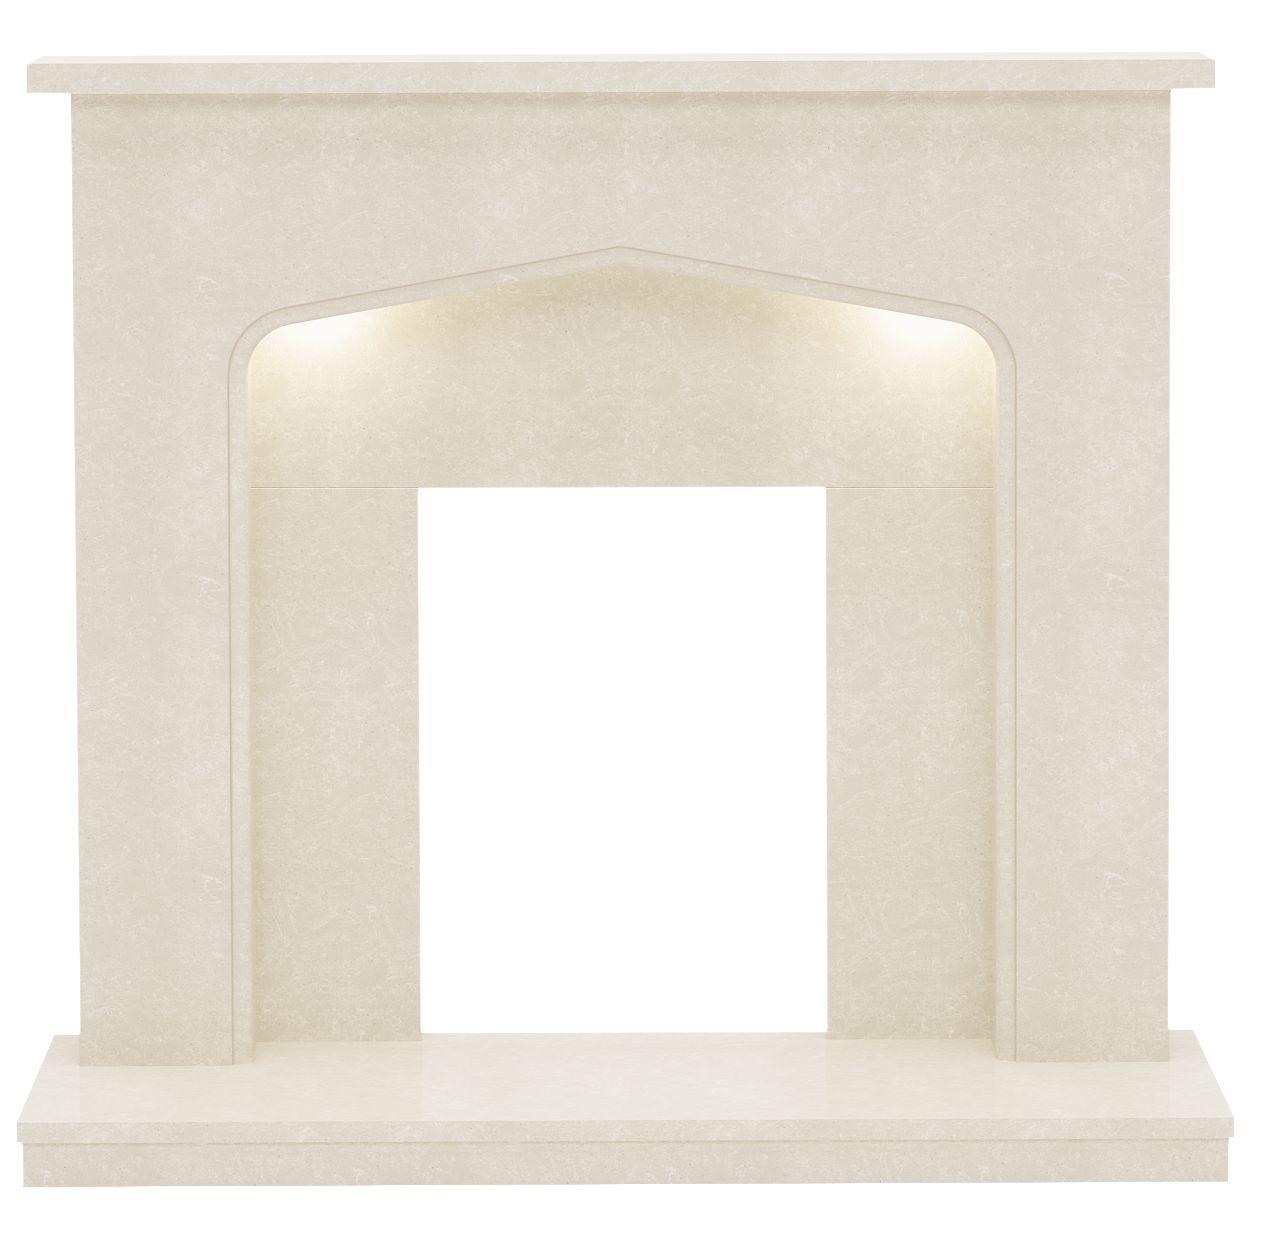 Be Modern Fire surround with lights